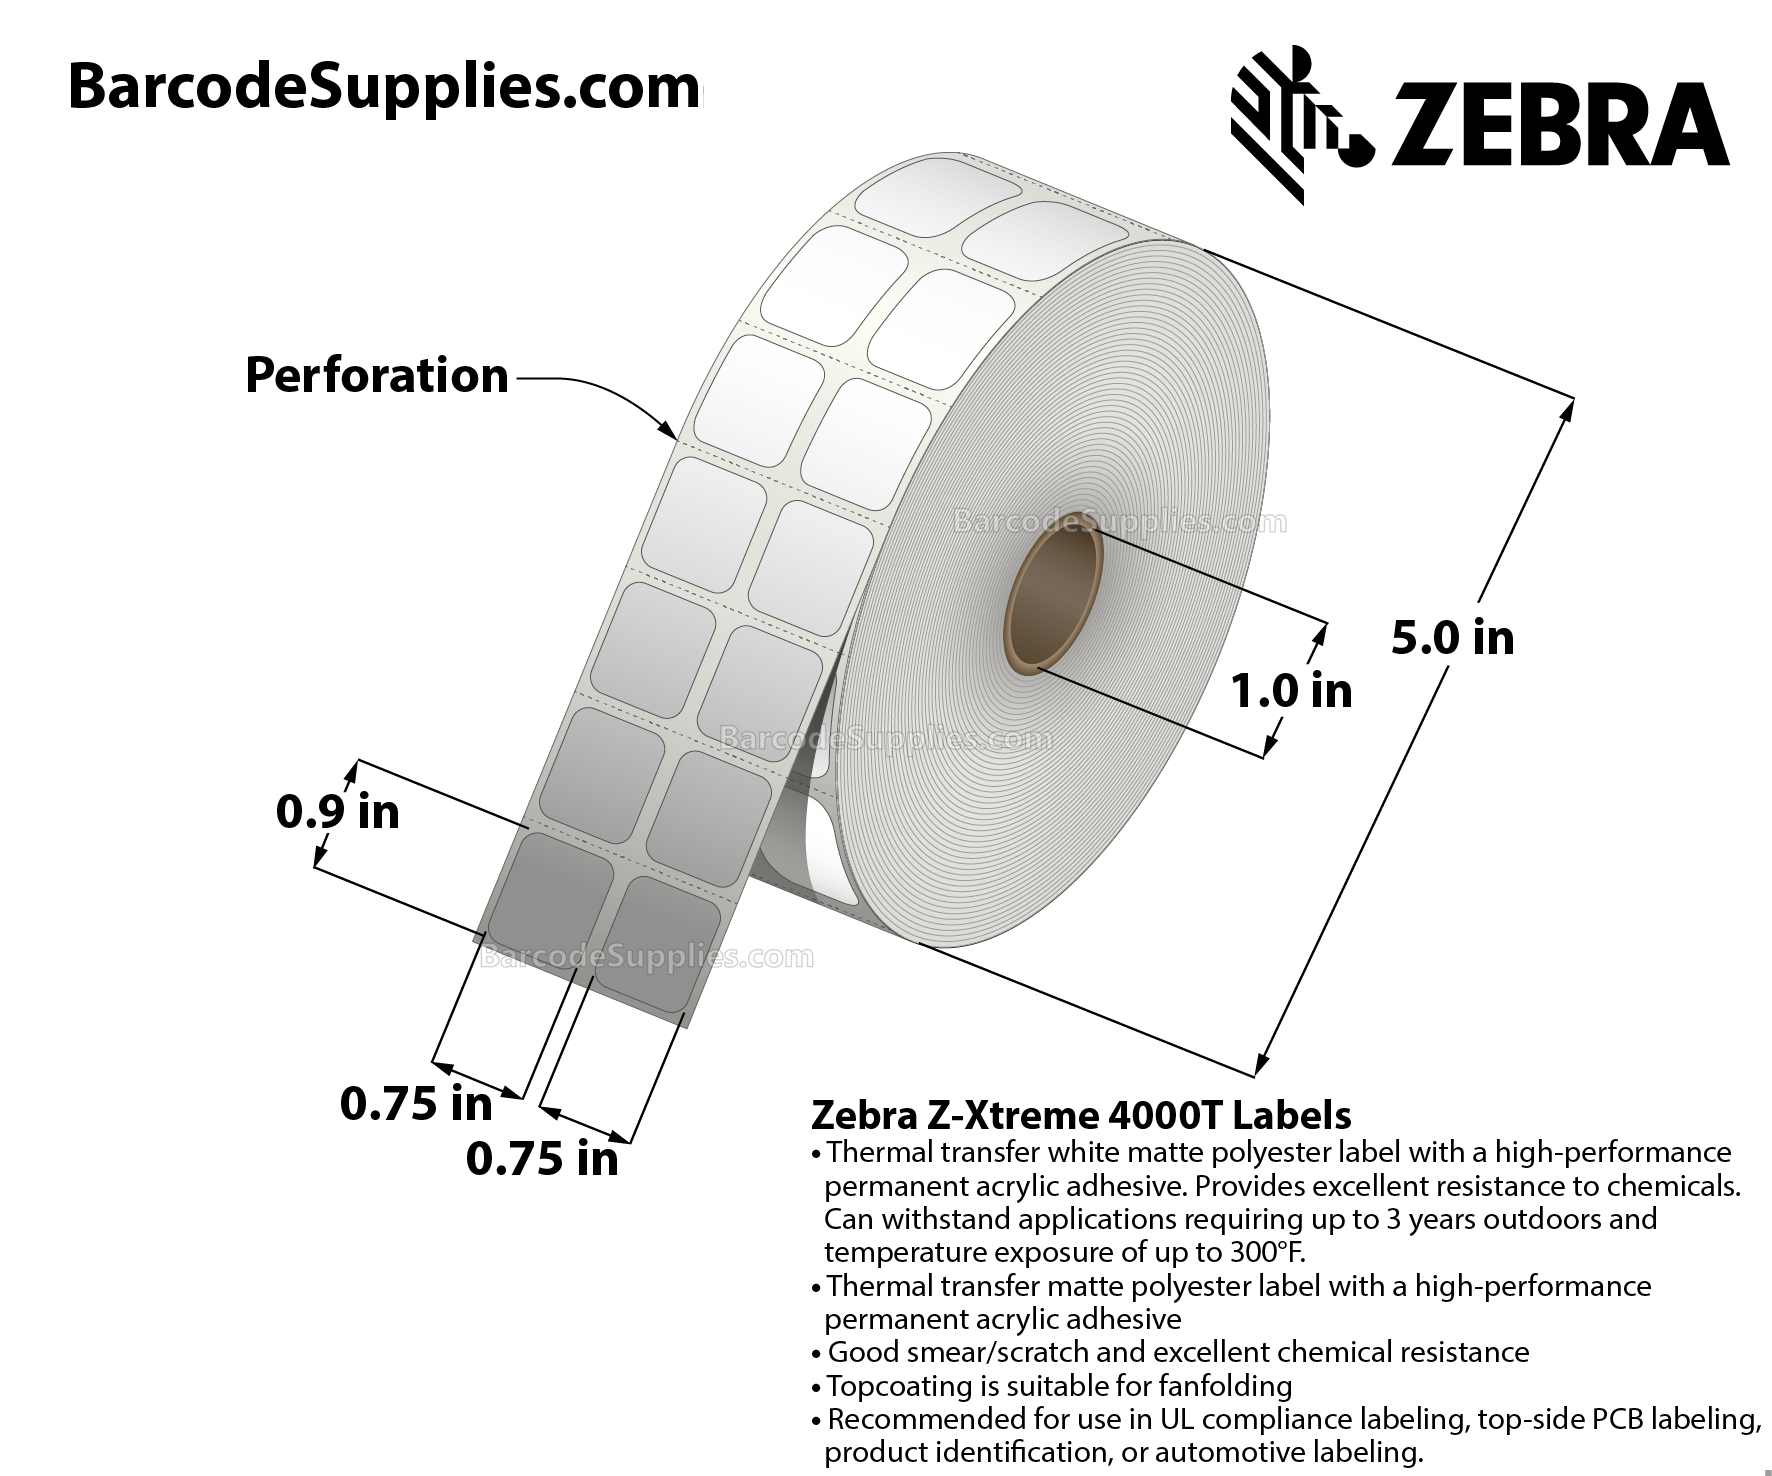 0.75 x 0.9 Thermal Transfer White Z-Xtreme 4000T White (2-Across) Labels With Permanent Adhesive - Black mark sensing - Perforated - 1500 Labels Per Roll - Carton Of 1 Rolls - 1500 Labels Total - MPN: 10023236